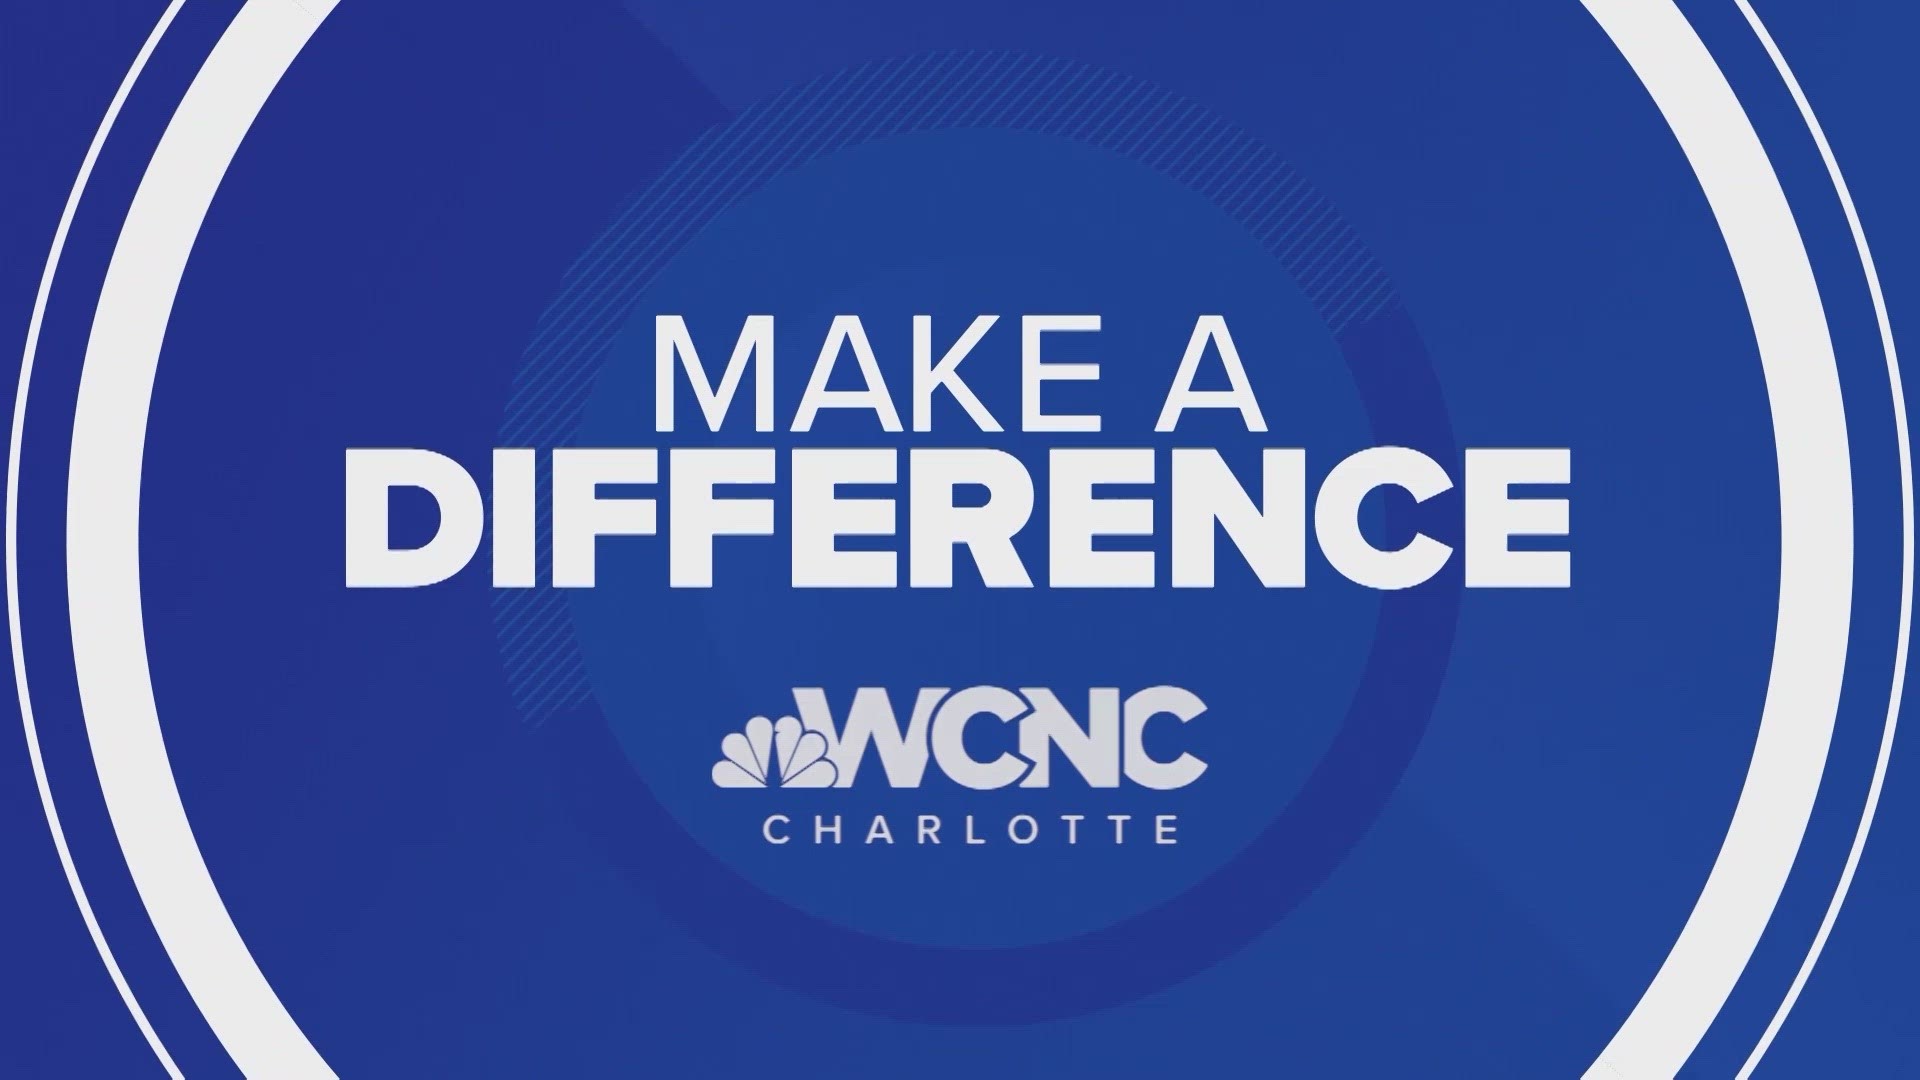 With your help, WCNC Charlotte is making a difference in our community.